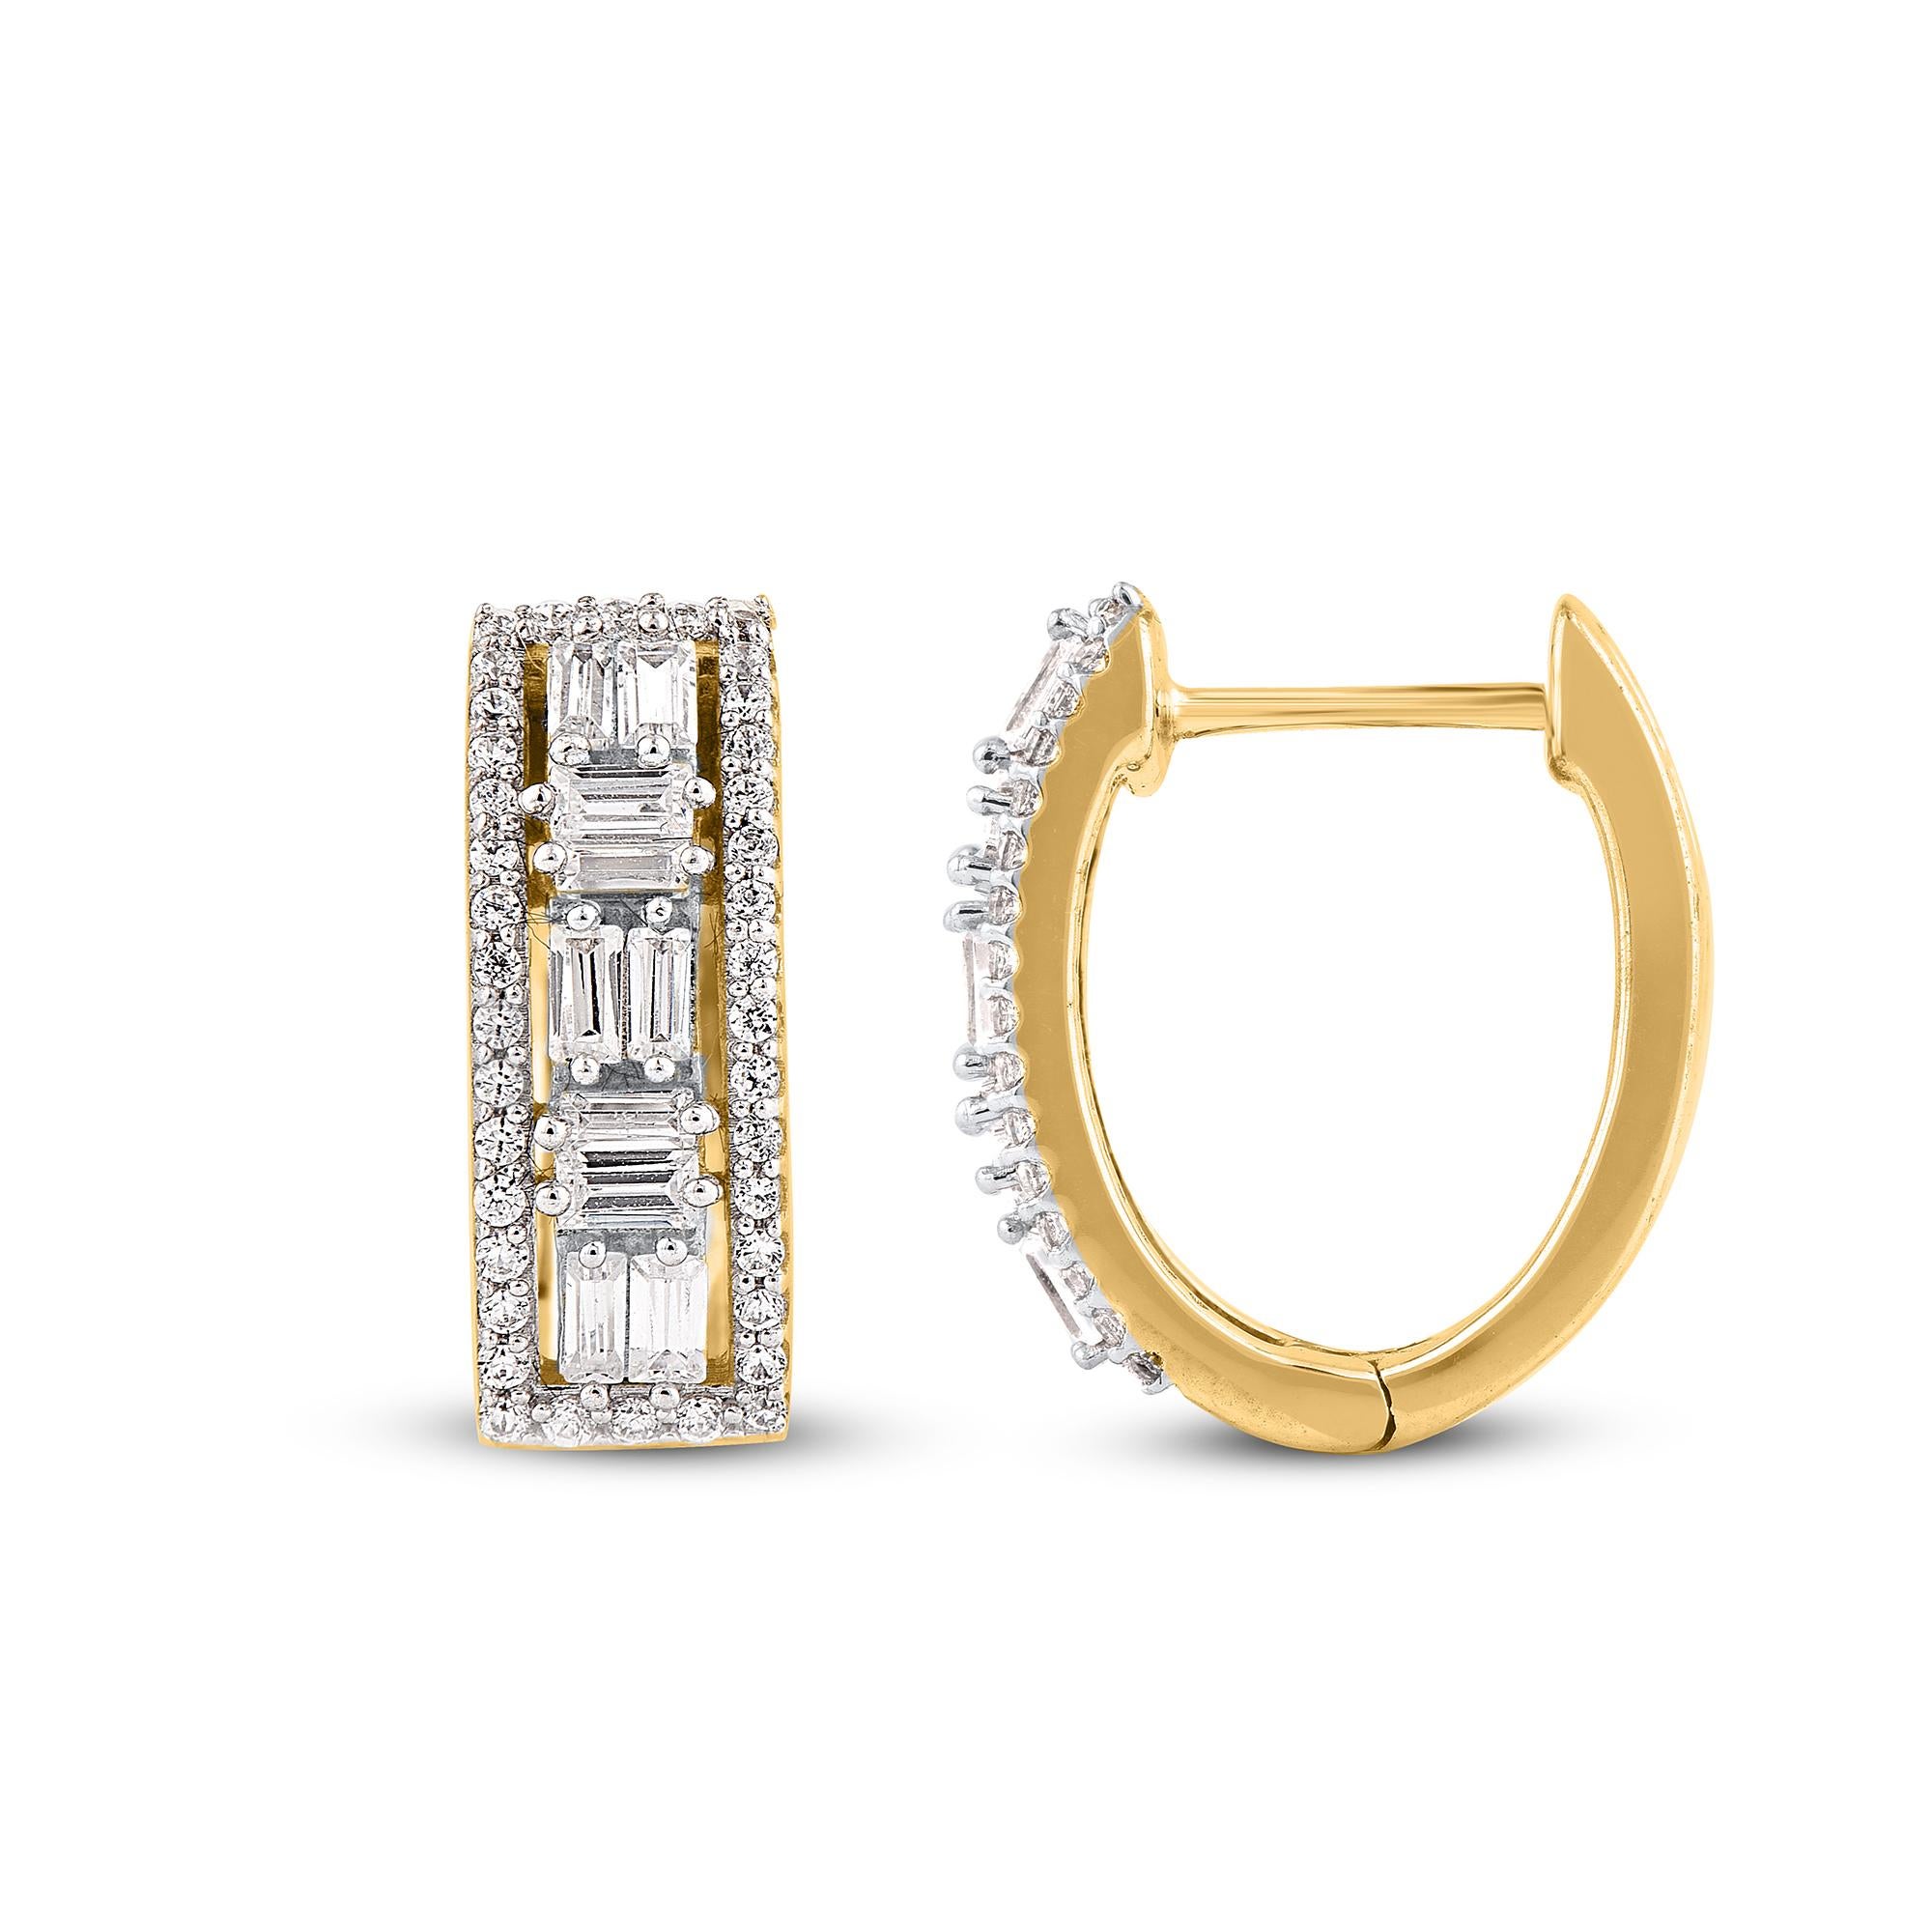 Bring charm to your look with this diamond hoop earrings. This earring is beautifully designed and studded with 96 single cut round diamond and baguette diamonds in prong setting. We only use natural, 100% conflict free diamonds which shines in H-I